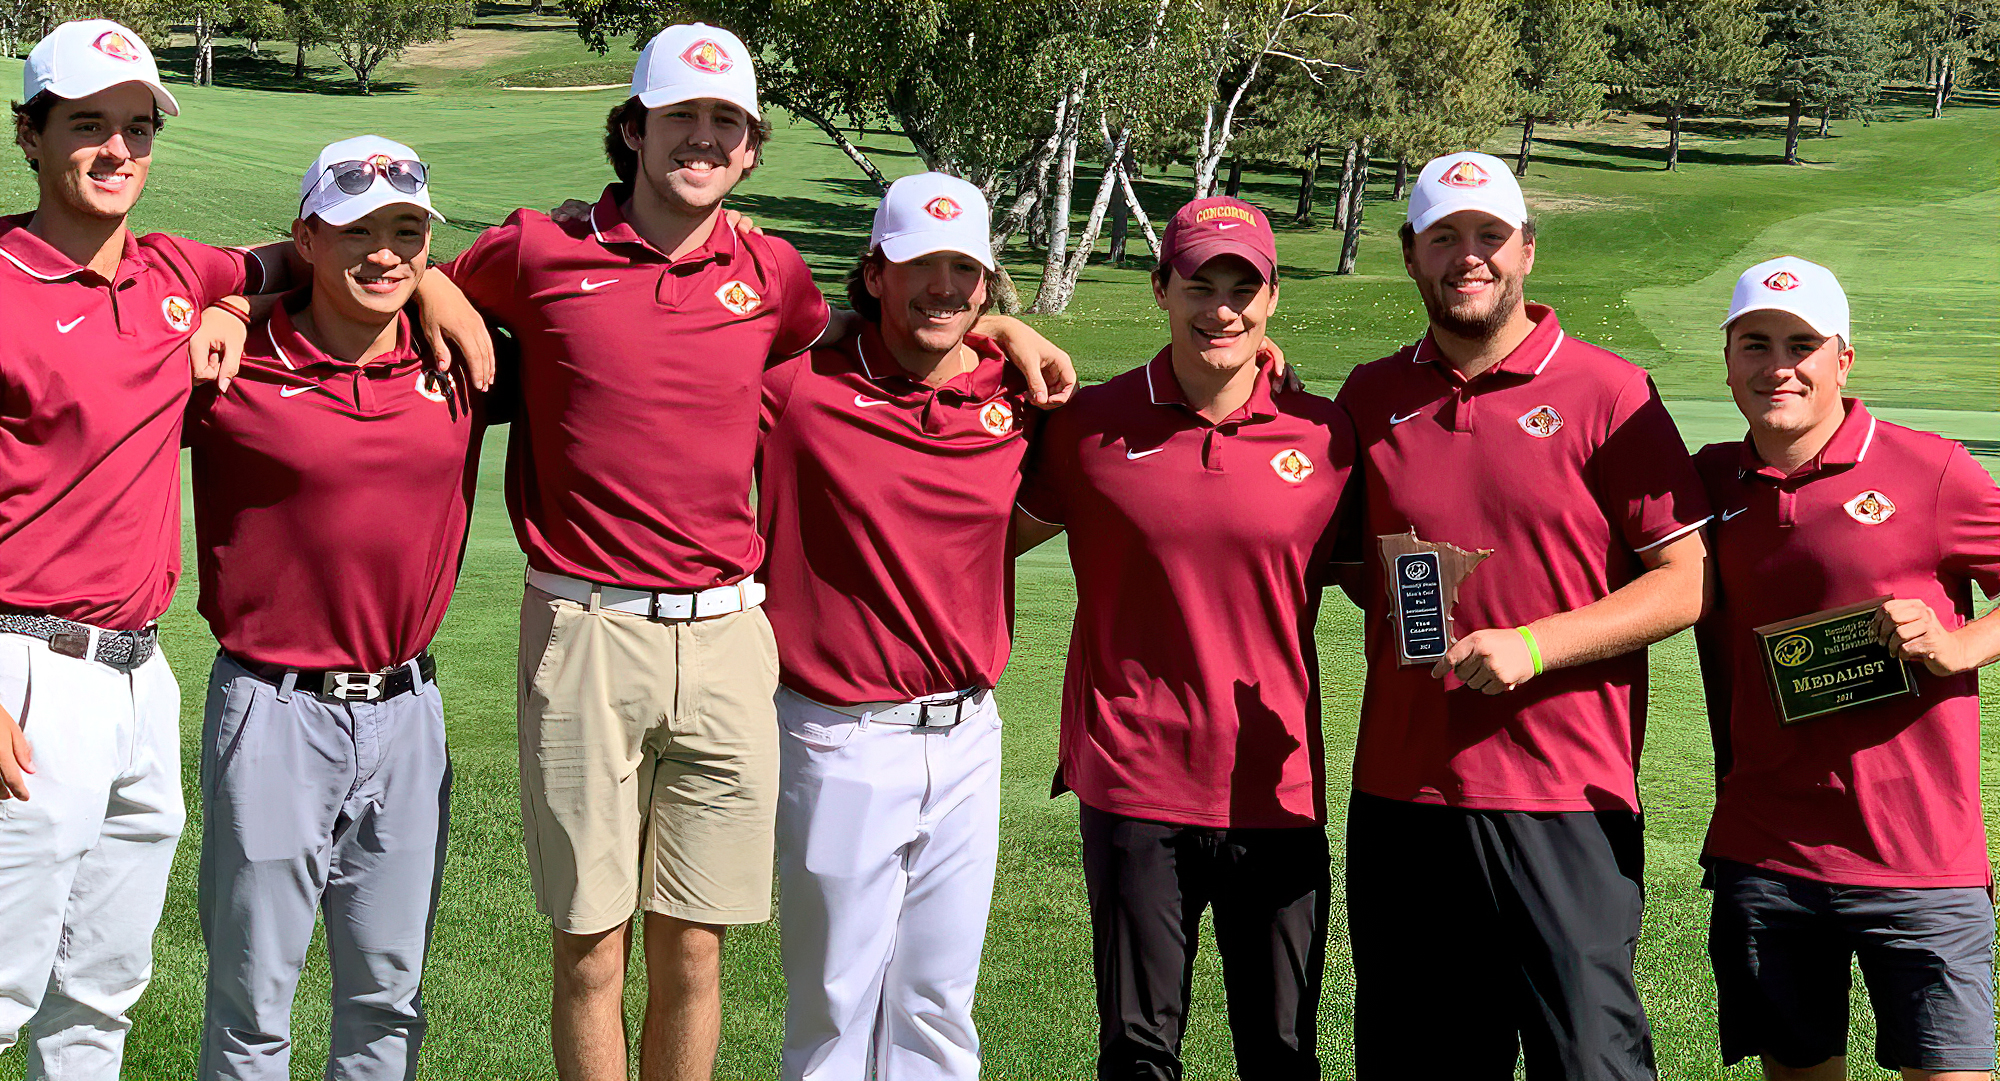 The Cobber men's squad poses with the championship trophy after winning the Bemidji State Invite. Mason Plante (R) claimed medalist honors.